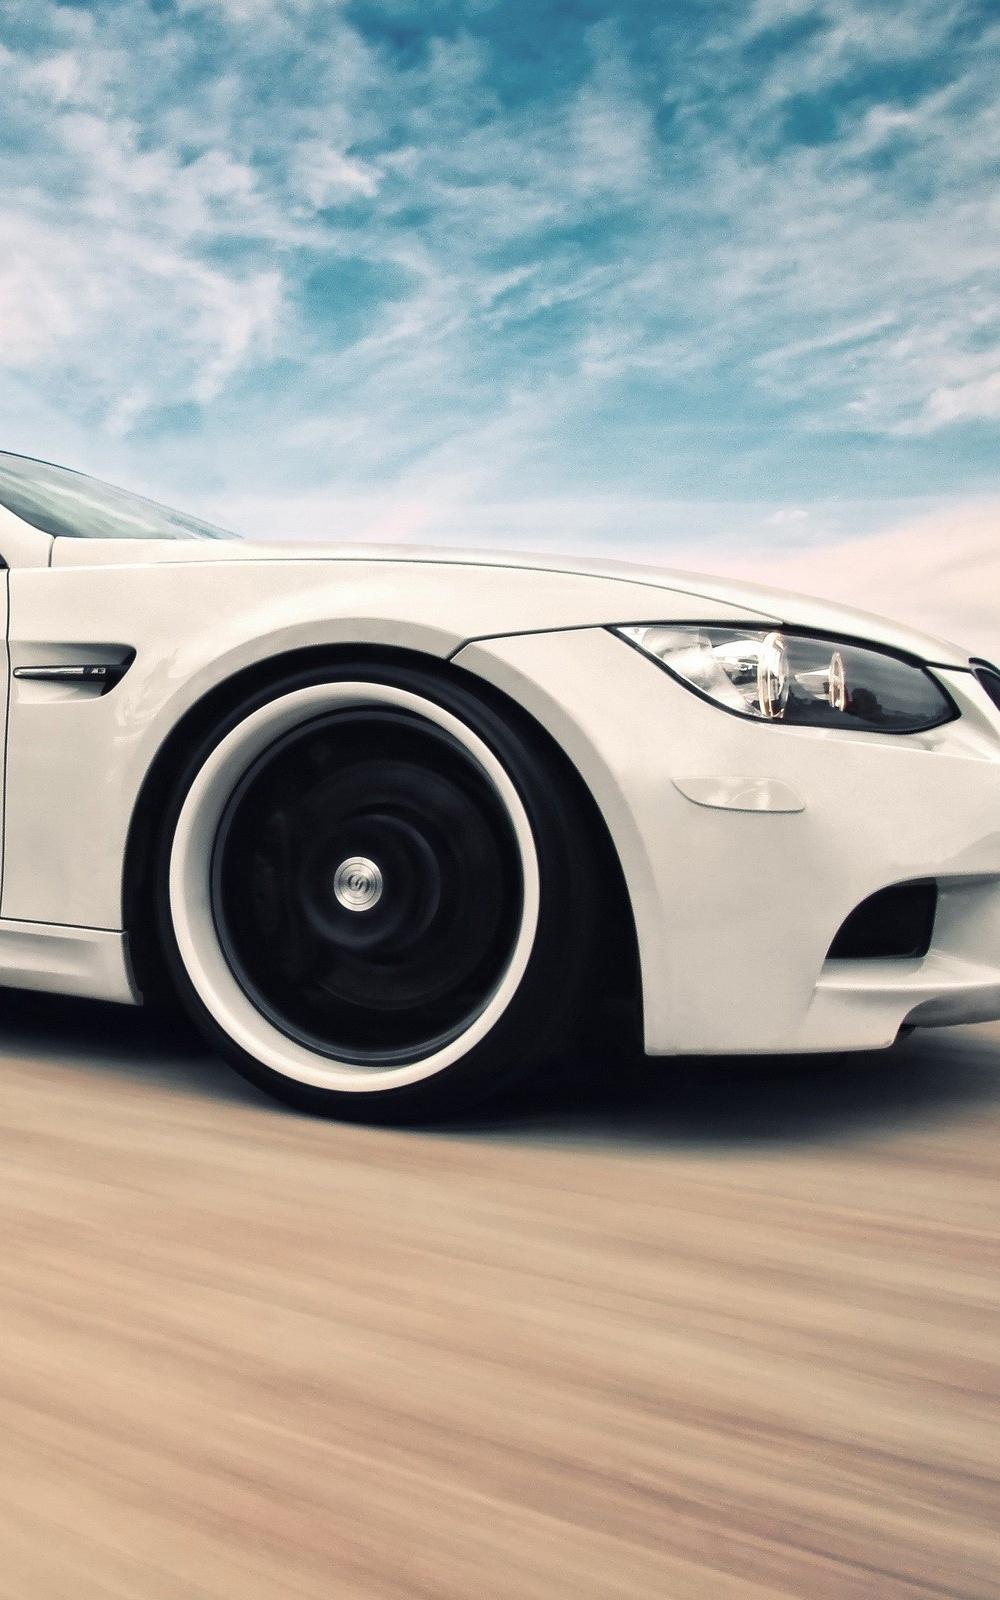 Bmw Car Wallpaper For Android, Download Wallpaper